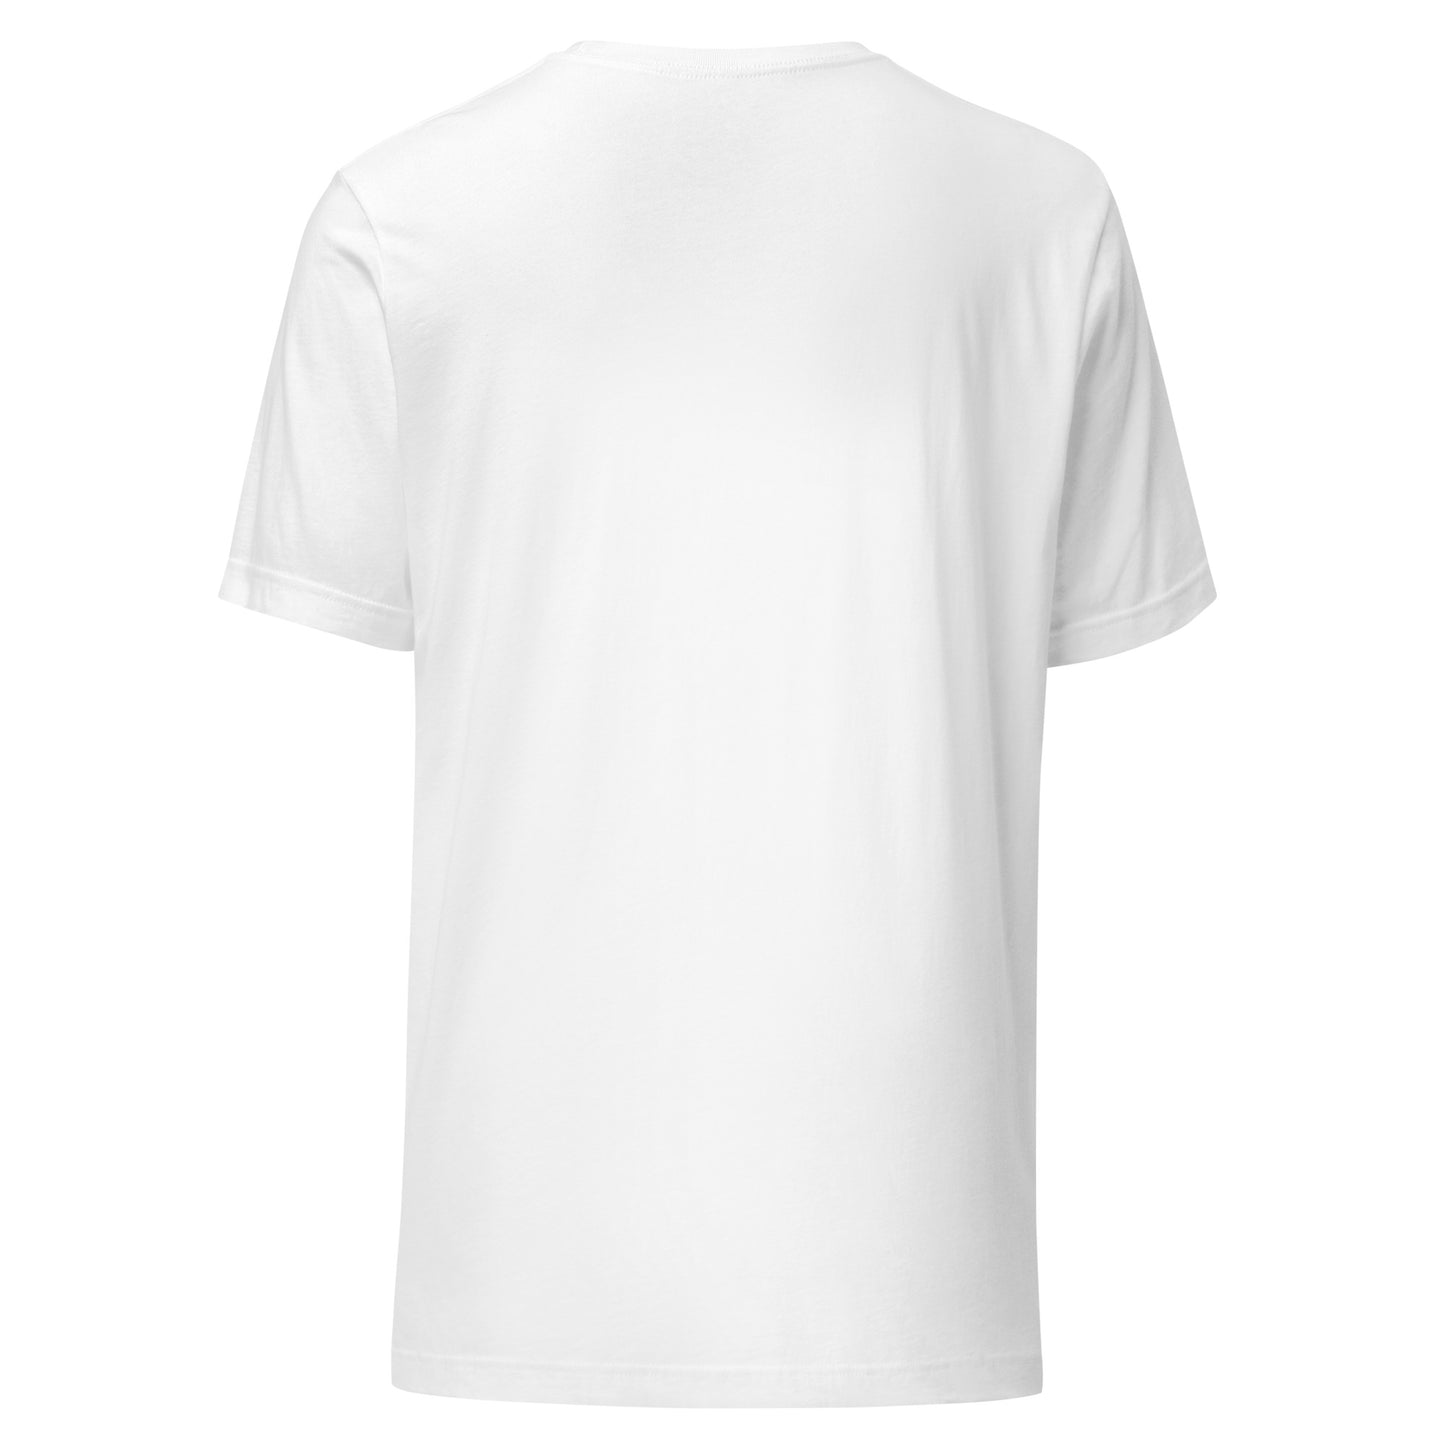 Winged Nymph Fly Classic Fit Short-Sleeve T-Shirt For Men